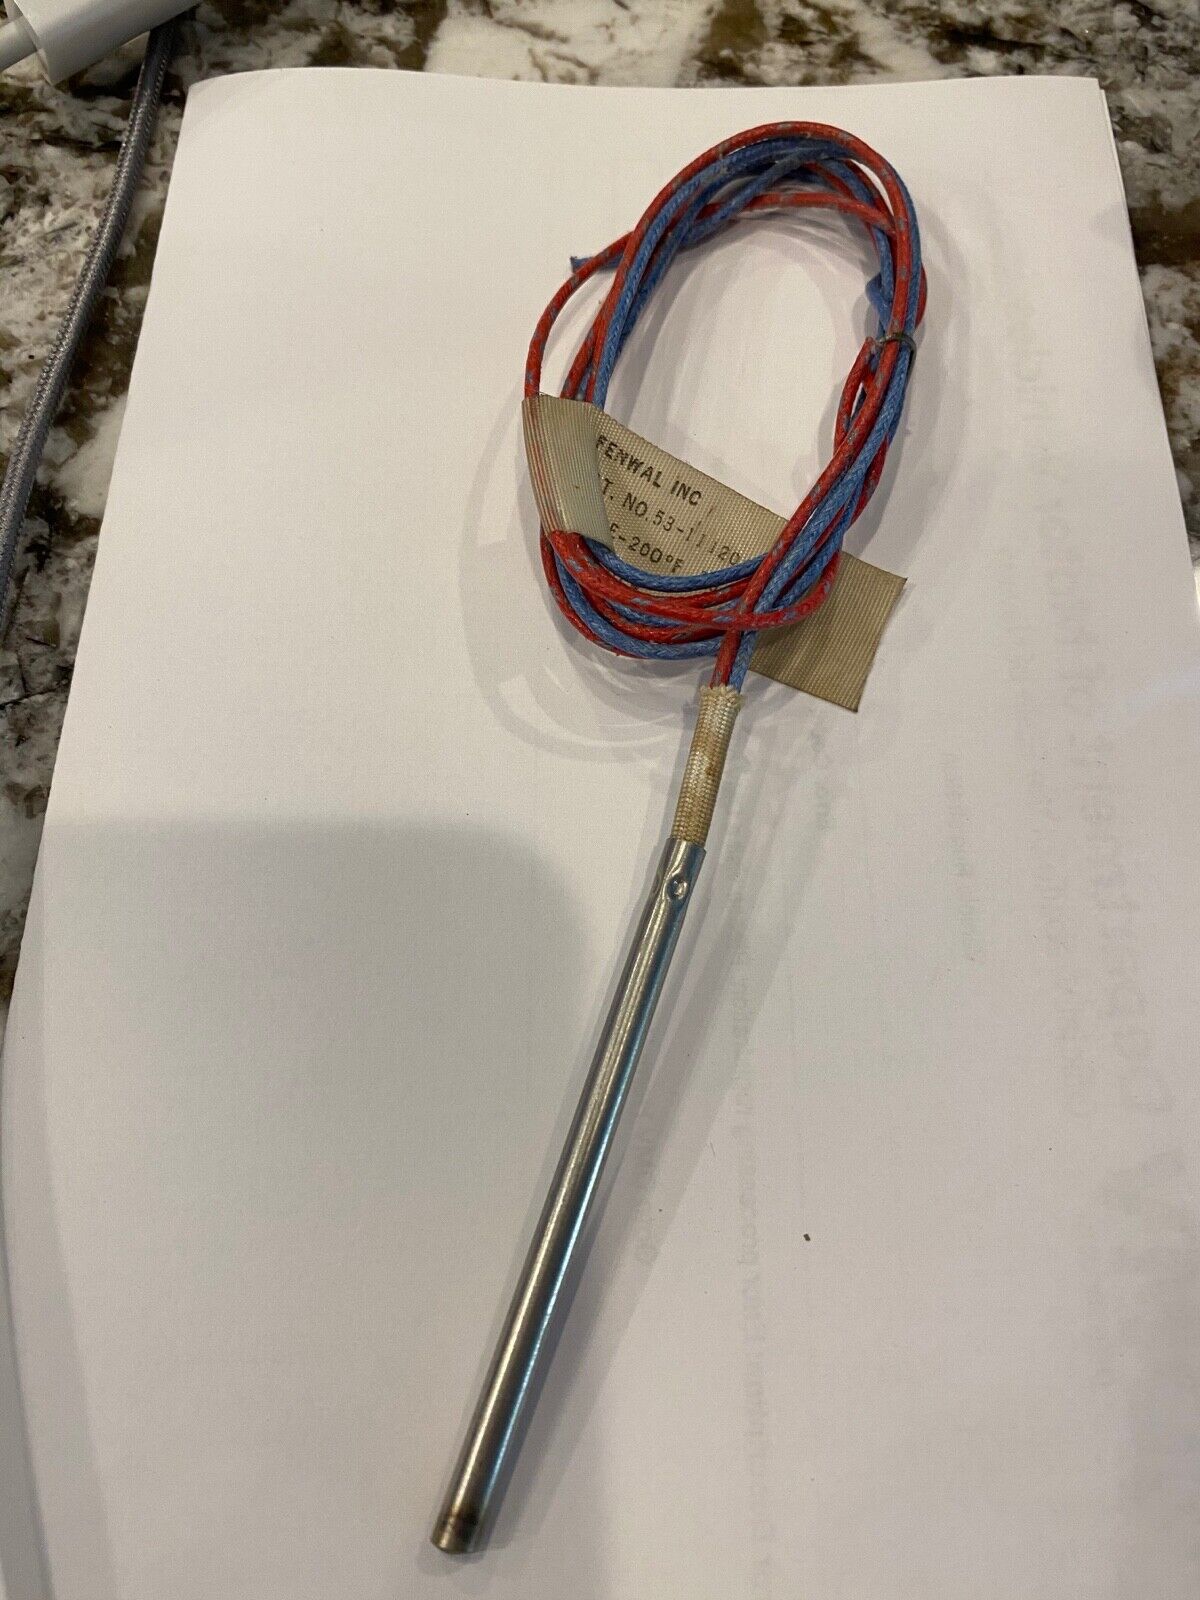 Fenwal Controls 53-111206-000 Thermocouple Probe -200 to 400 Degrees F